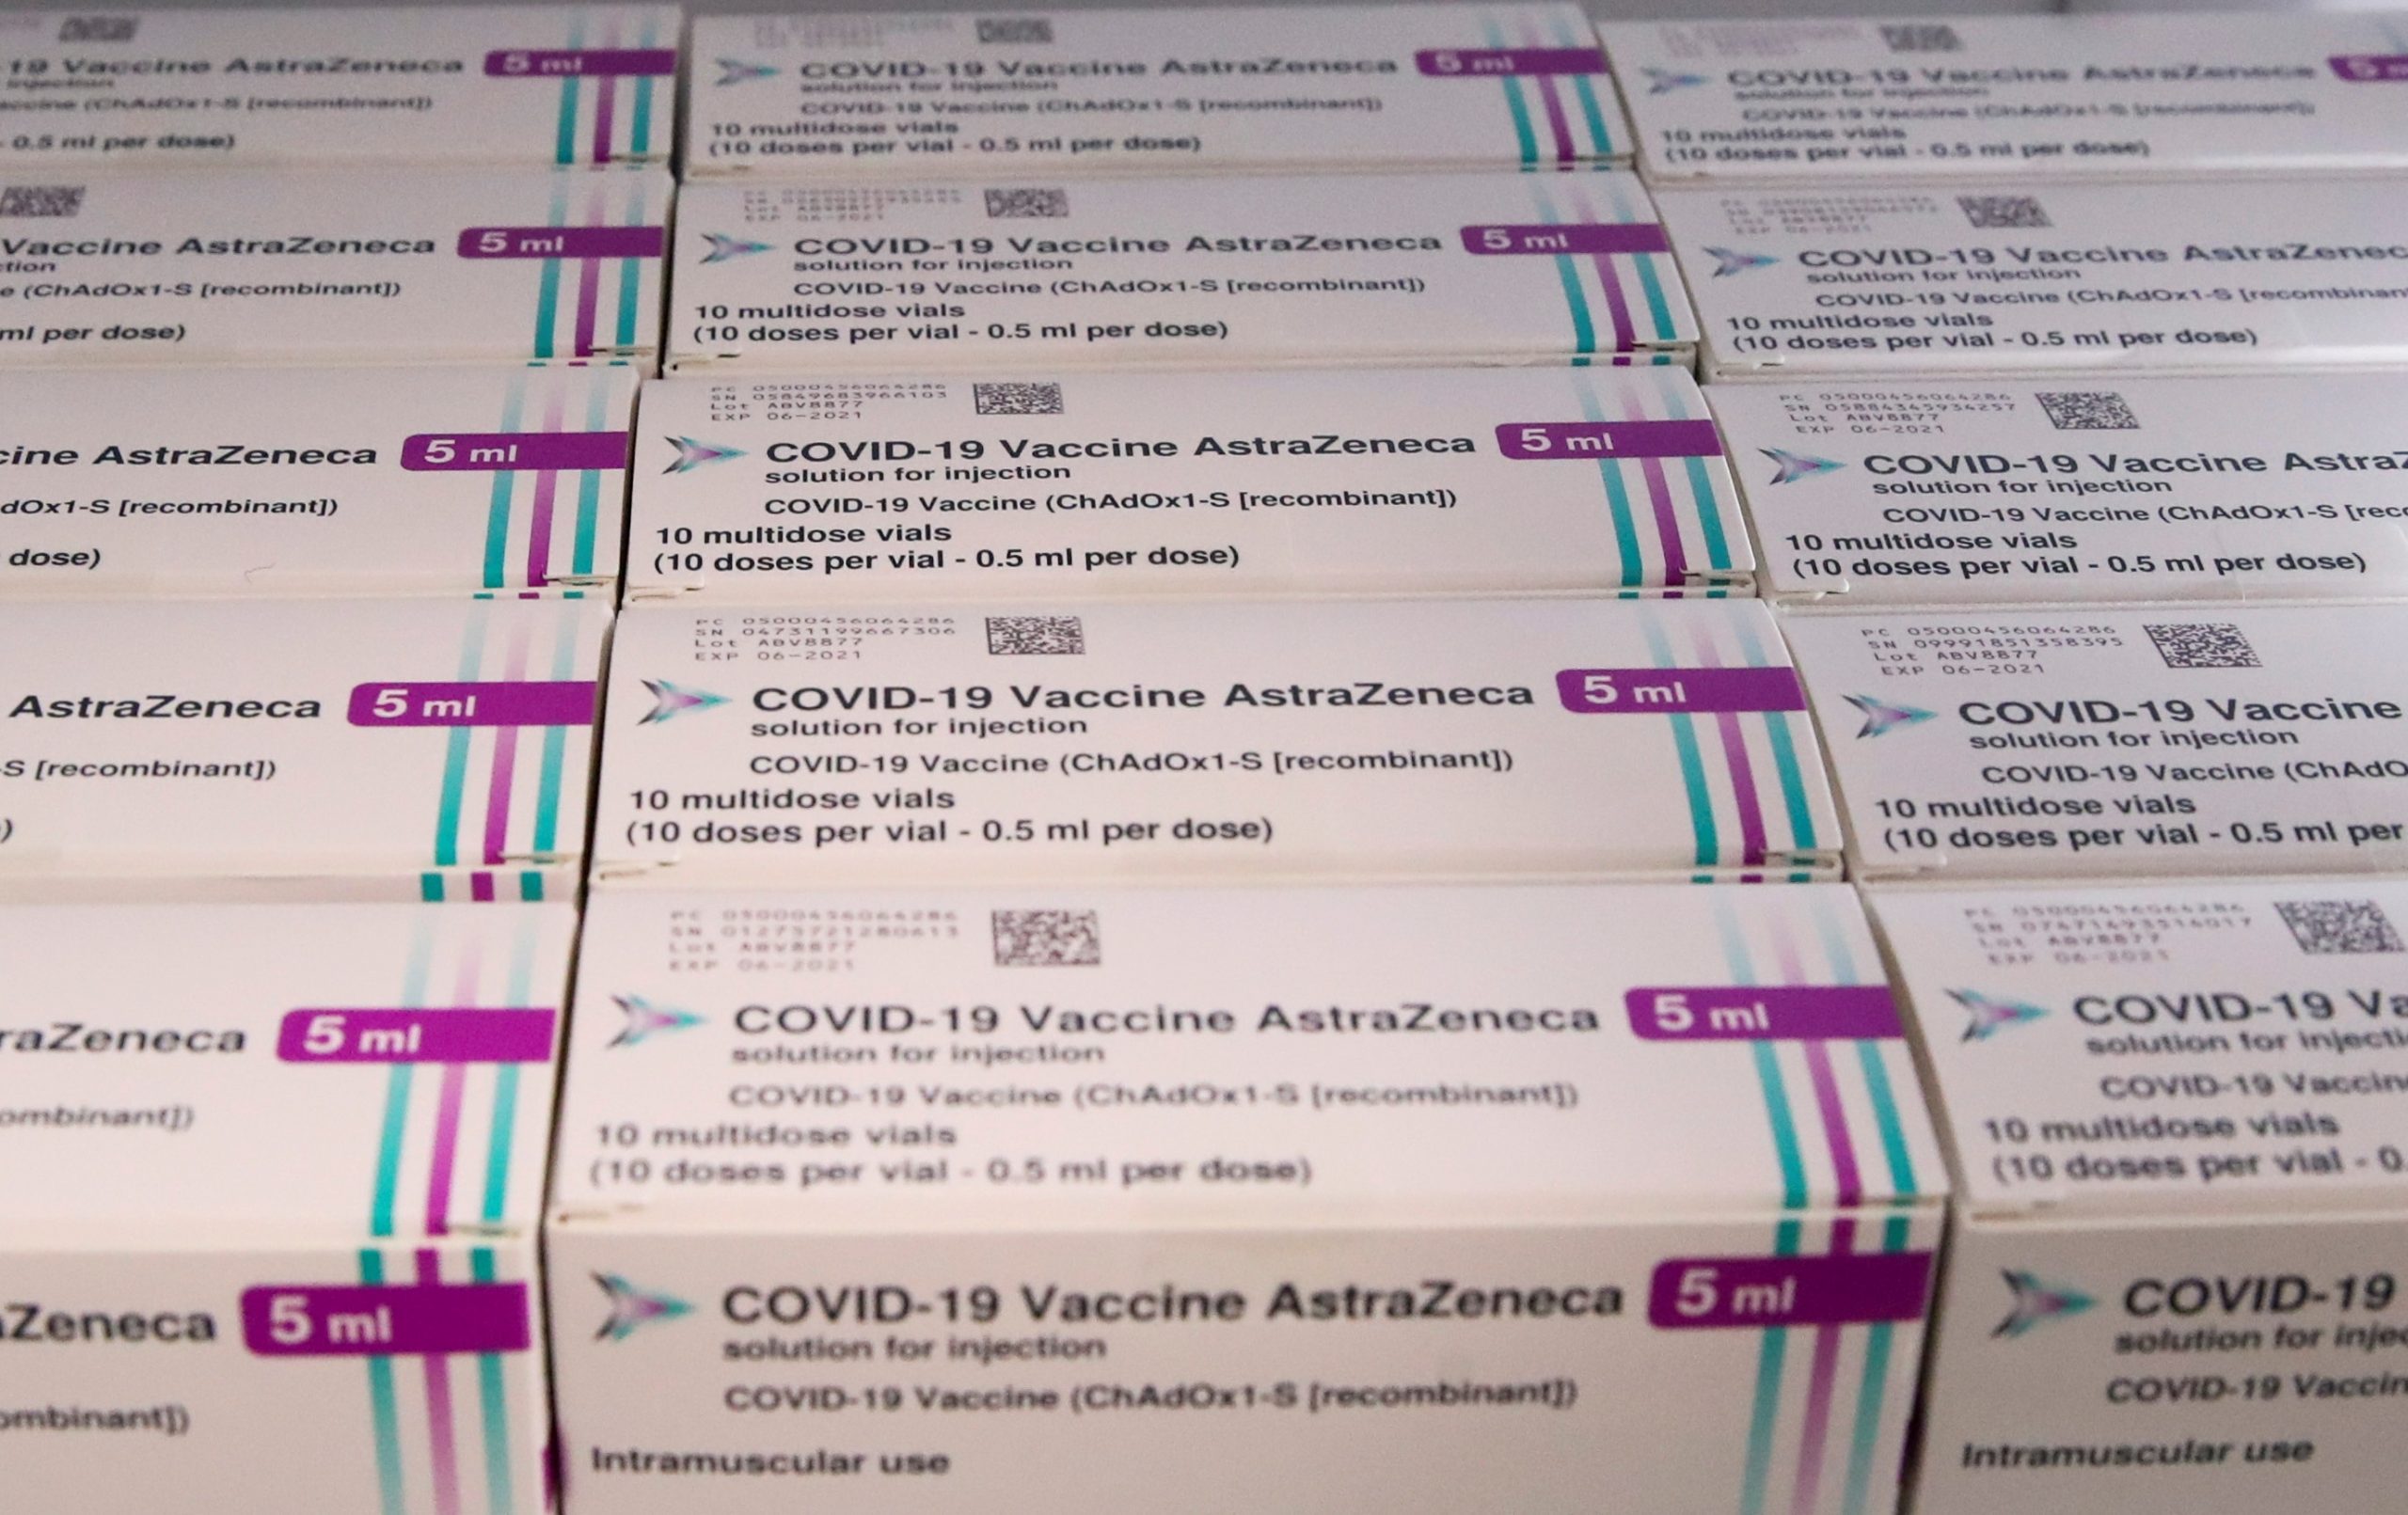 FILE PHOTO: AstraZeneca COVID-19 vaccine is seen at a vaccination center in Ronquieres FILE PHOTO: Boxes of AstraZeneca COVID-19 vaccine are seen at a vaccination center, amid the coronavirus disease outbreak, in Ronquieres, Belgium April 6, 2021. REUTERS/Yves Herman/File Photo Yves Herman